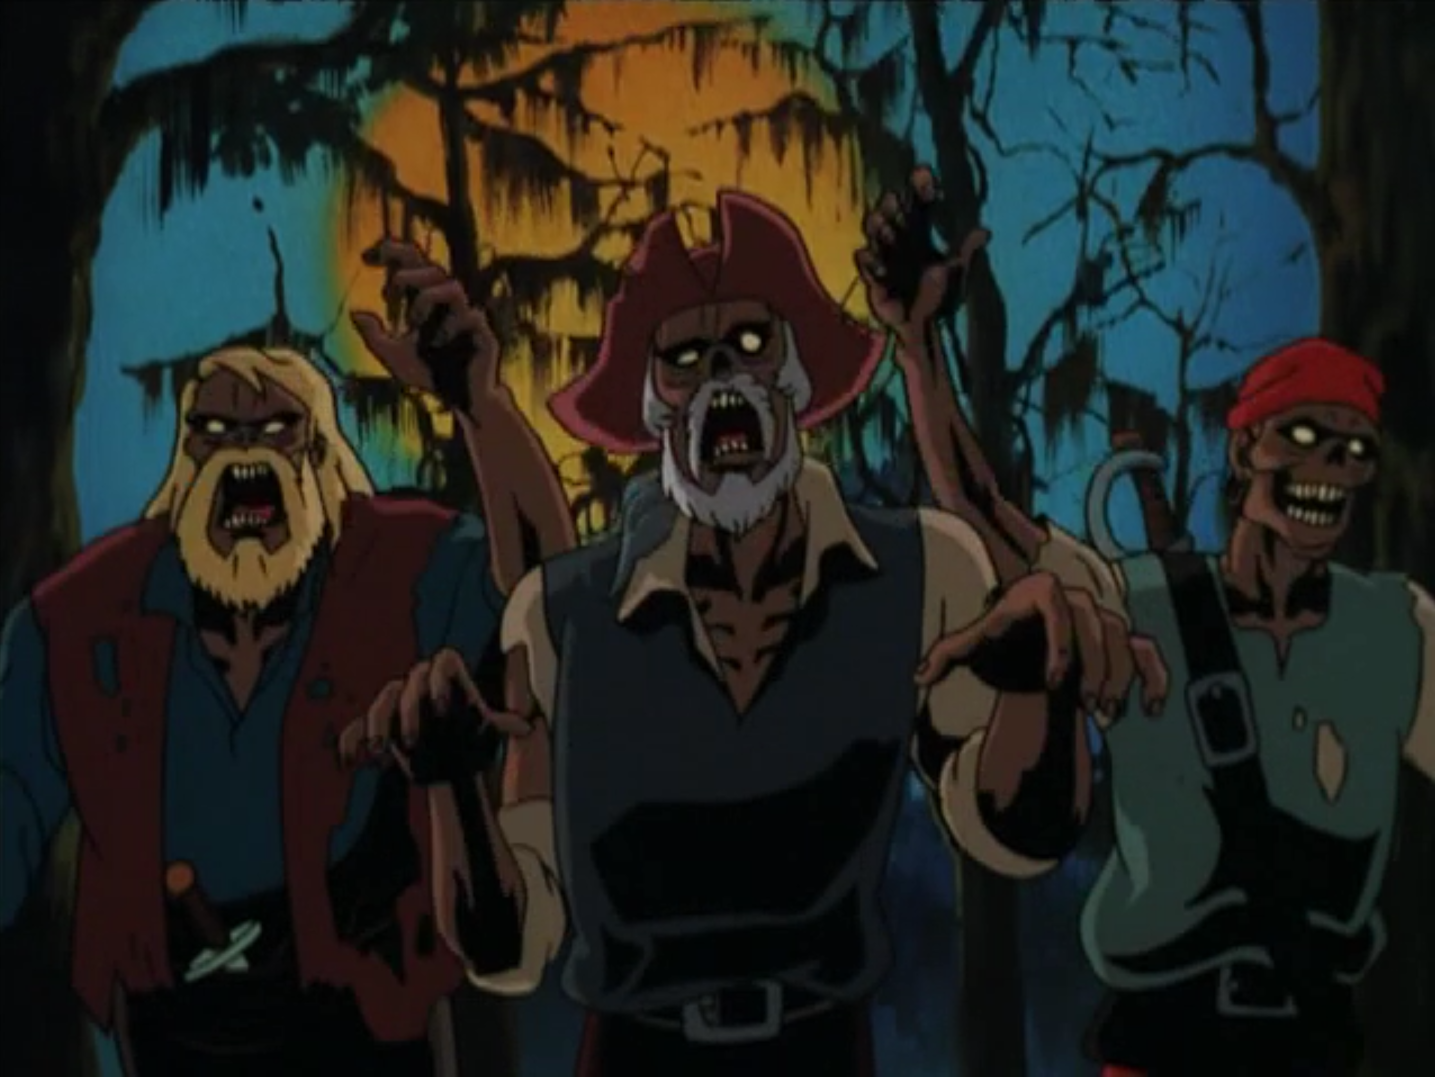 Animated zombies in Scooby Doo on Zombie Island, popular among '90s horror movies.